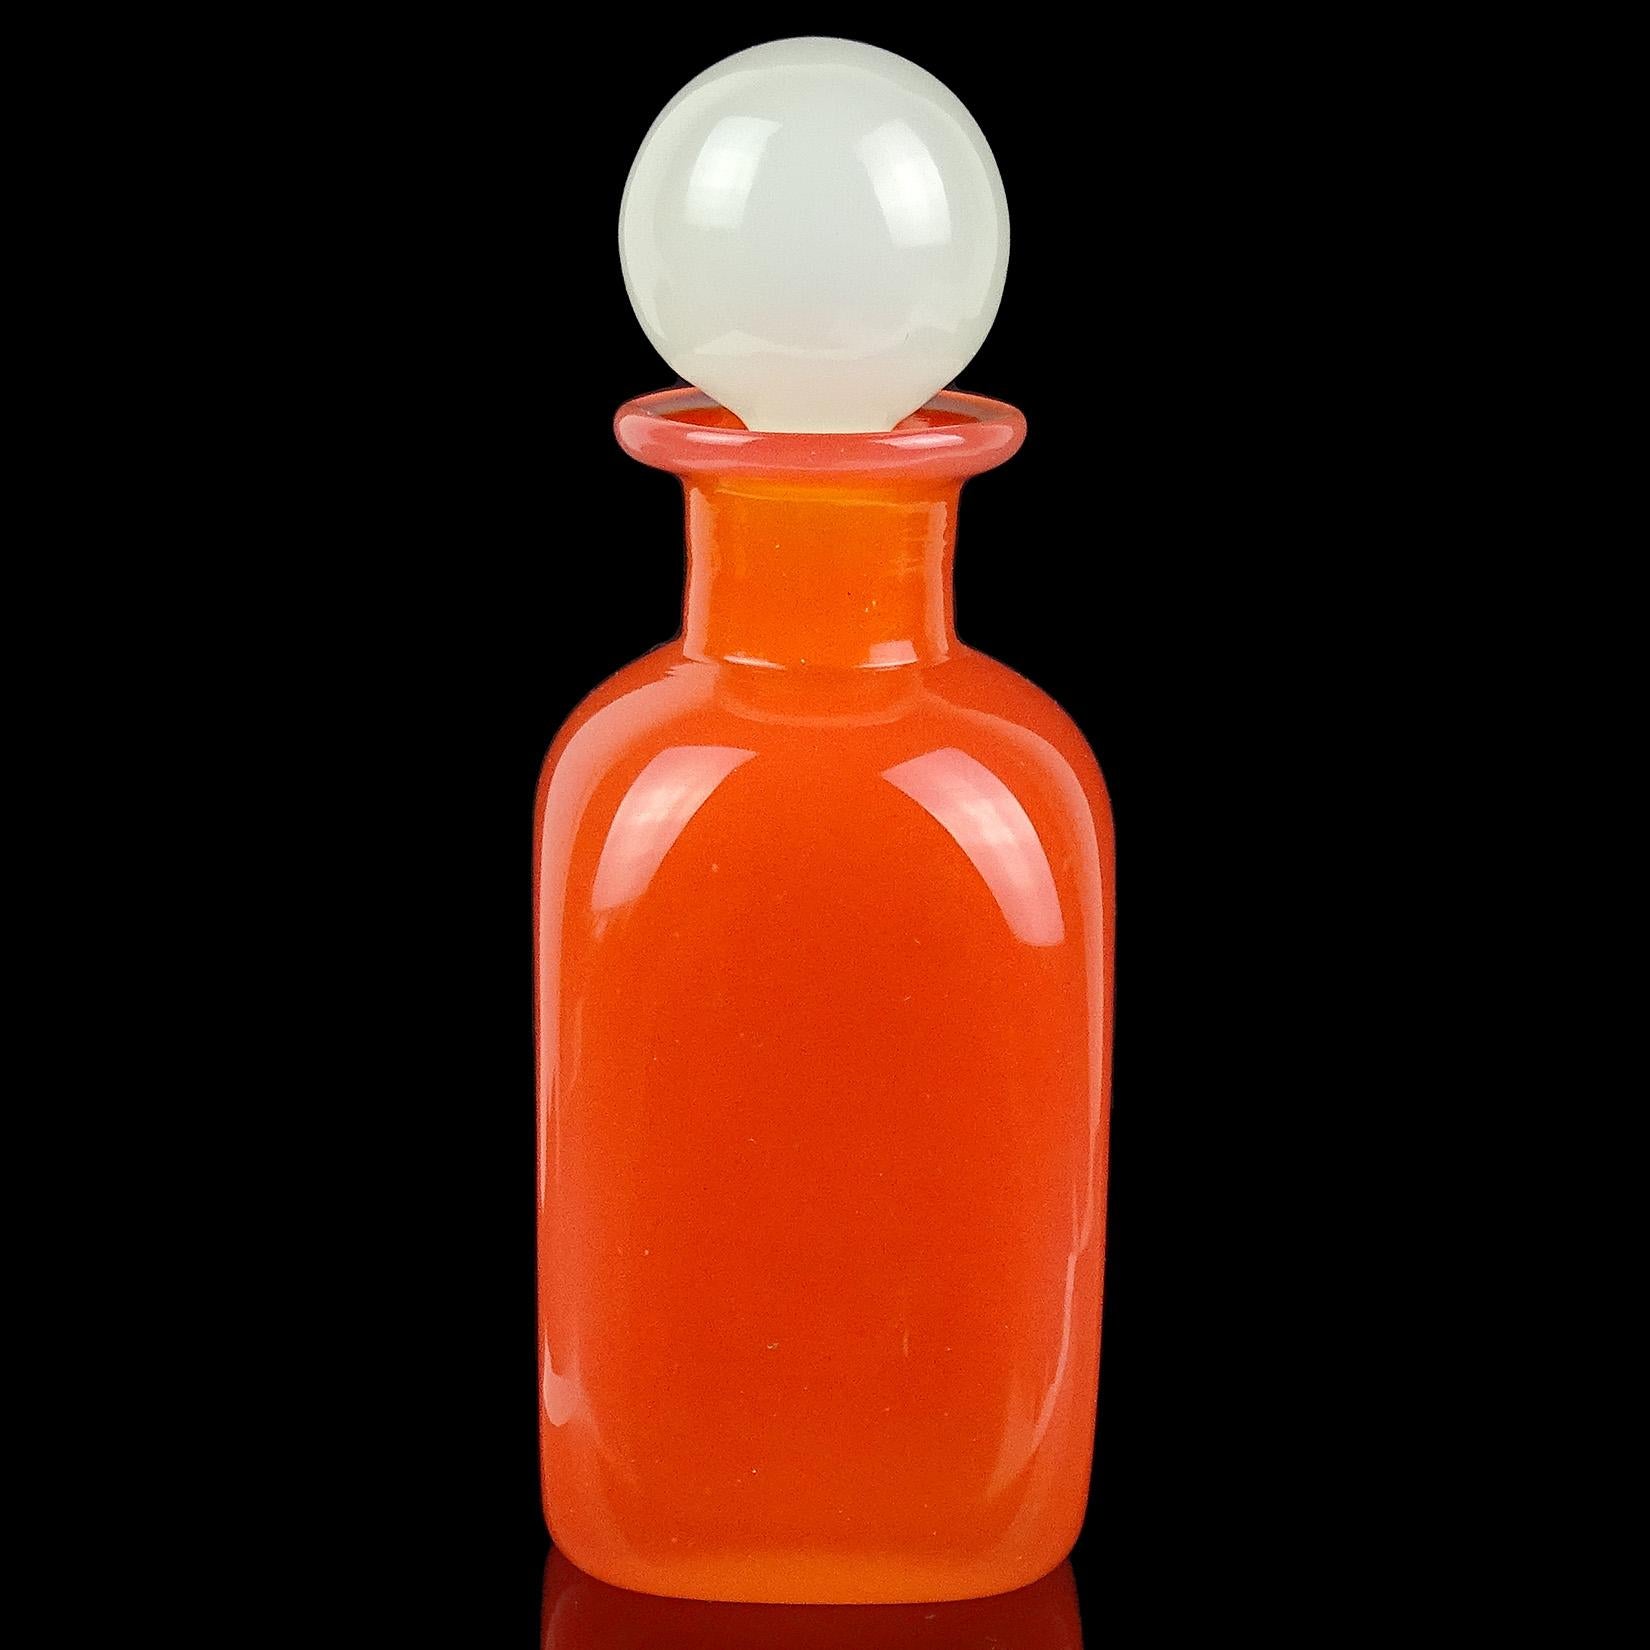 Beautiful Murano hand blown orange opalescent with white opal stopper Italian art glass decanter / bottle. Documented to designer Archimede Seguso. It has 2 original labels still attached, including 